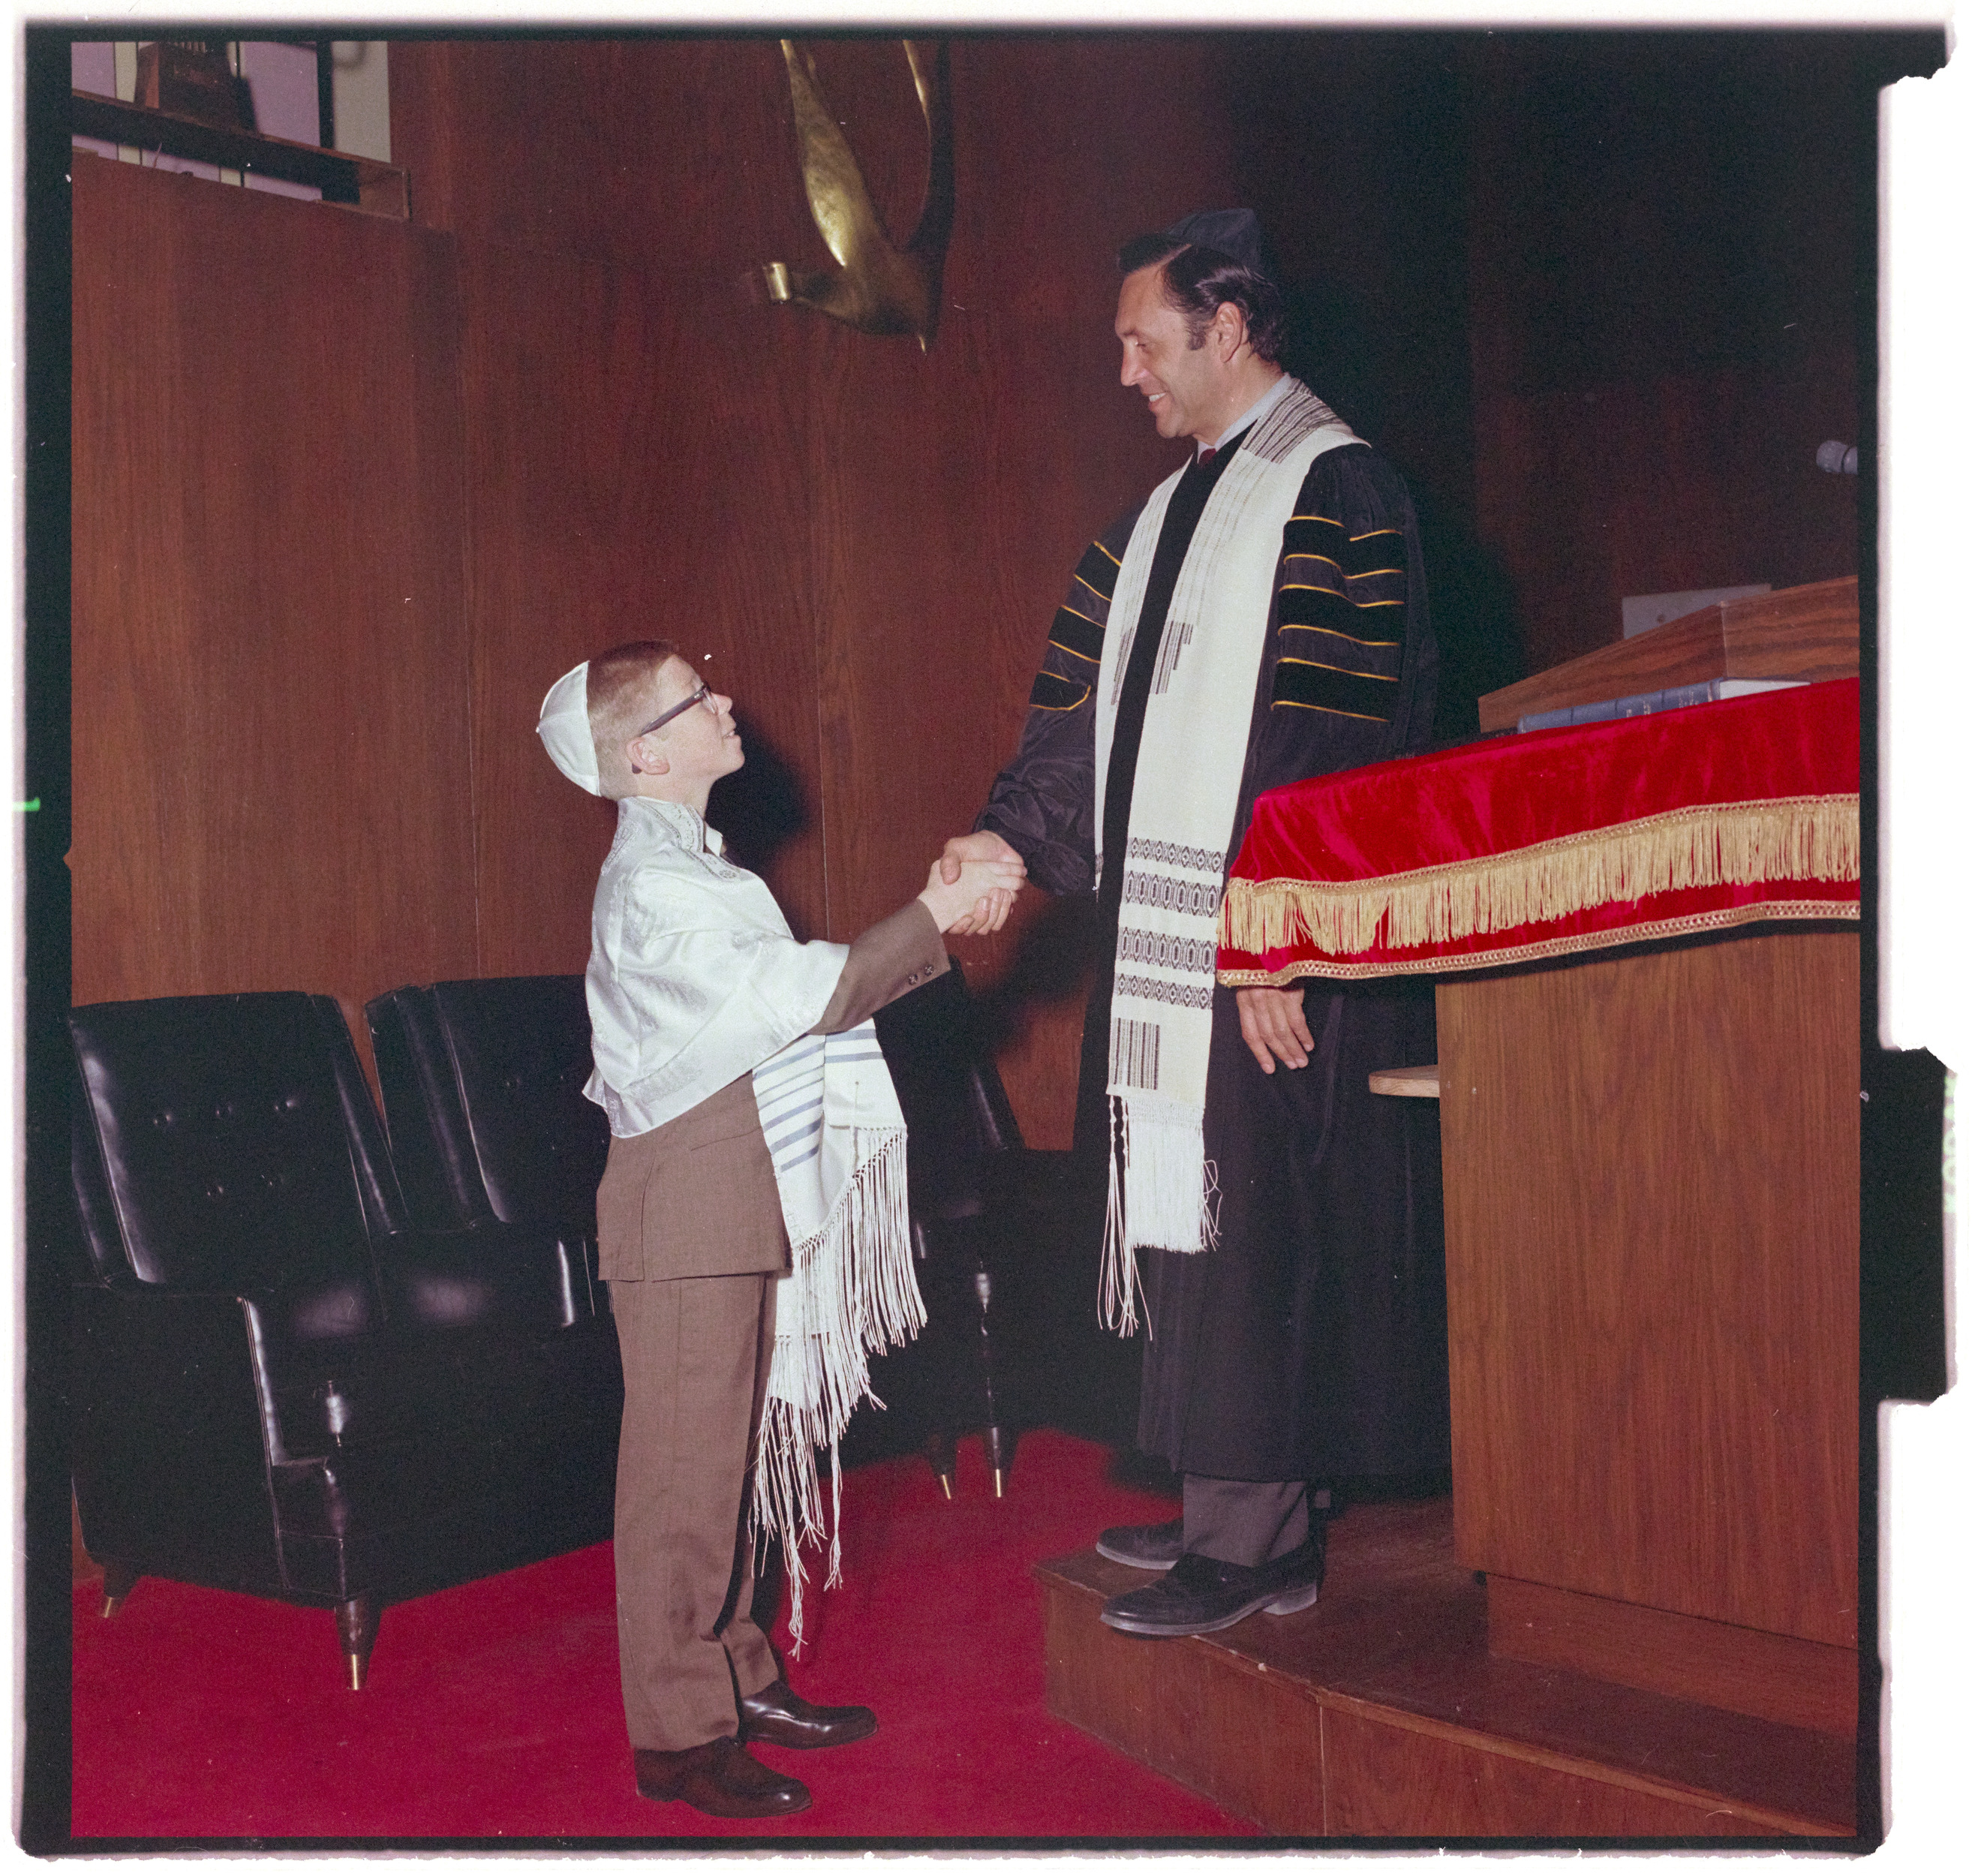 Photographs of Andrew Levy Bar Mitzvah, image 10